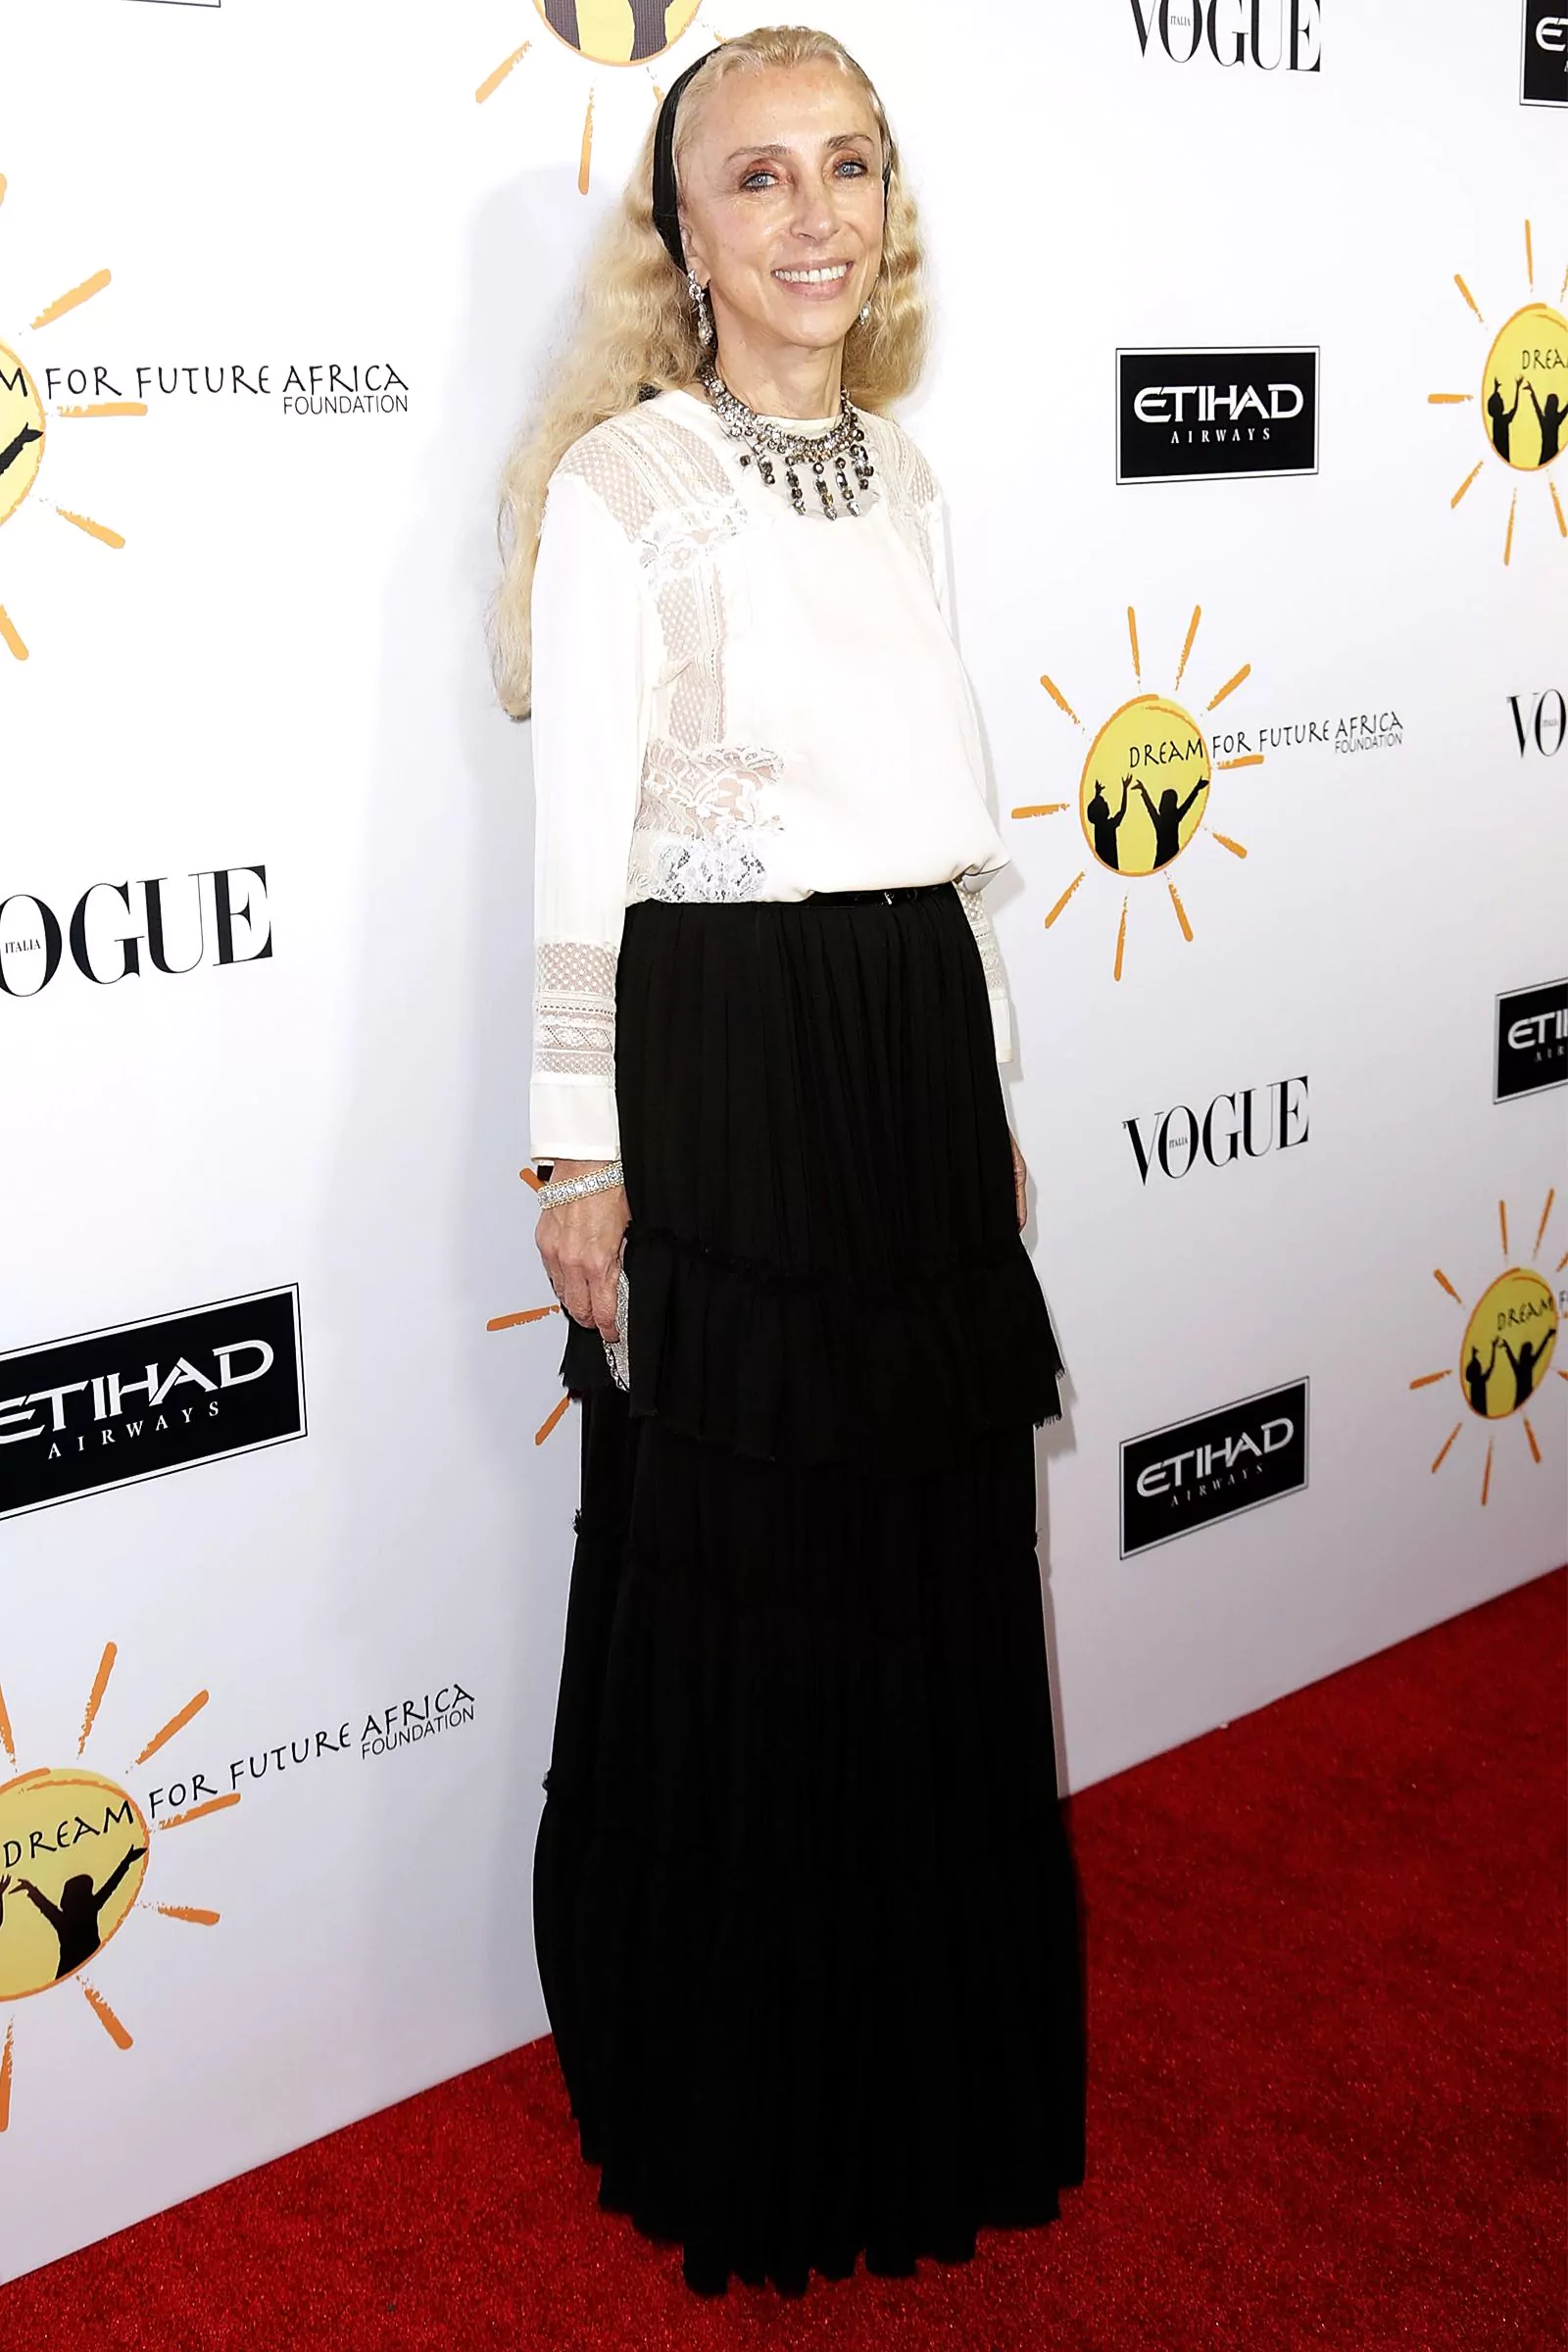 Franca Sozzani at Gelila & Wolfgang Puck's Dream for Future Africa Foundation event in Los Angeles, October 25, 2013, photo 1